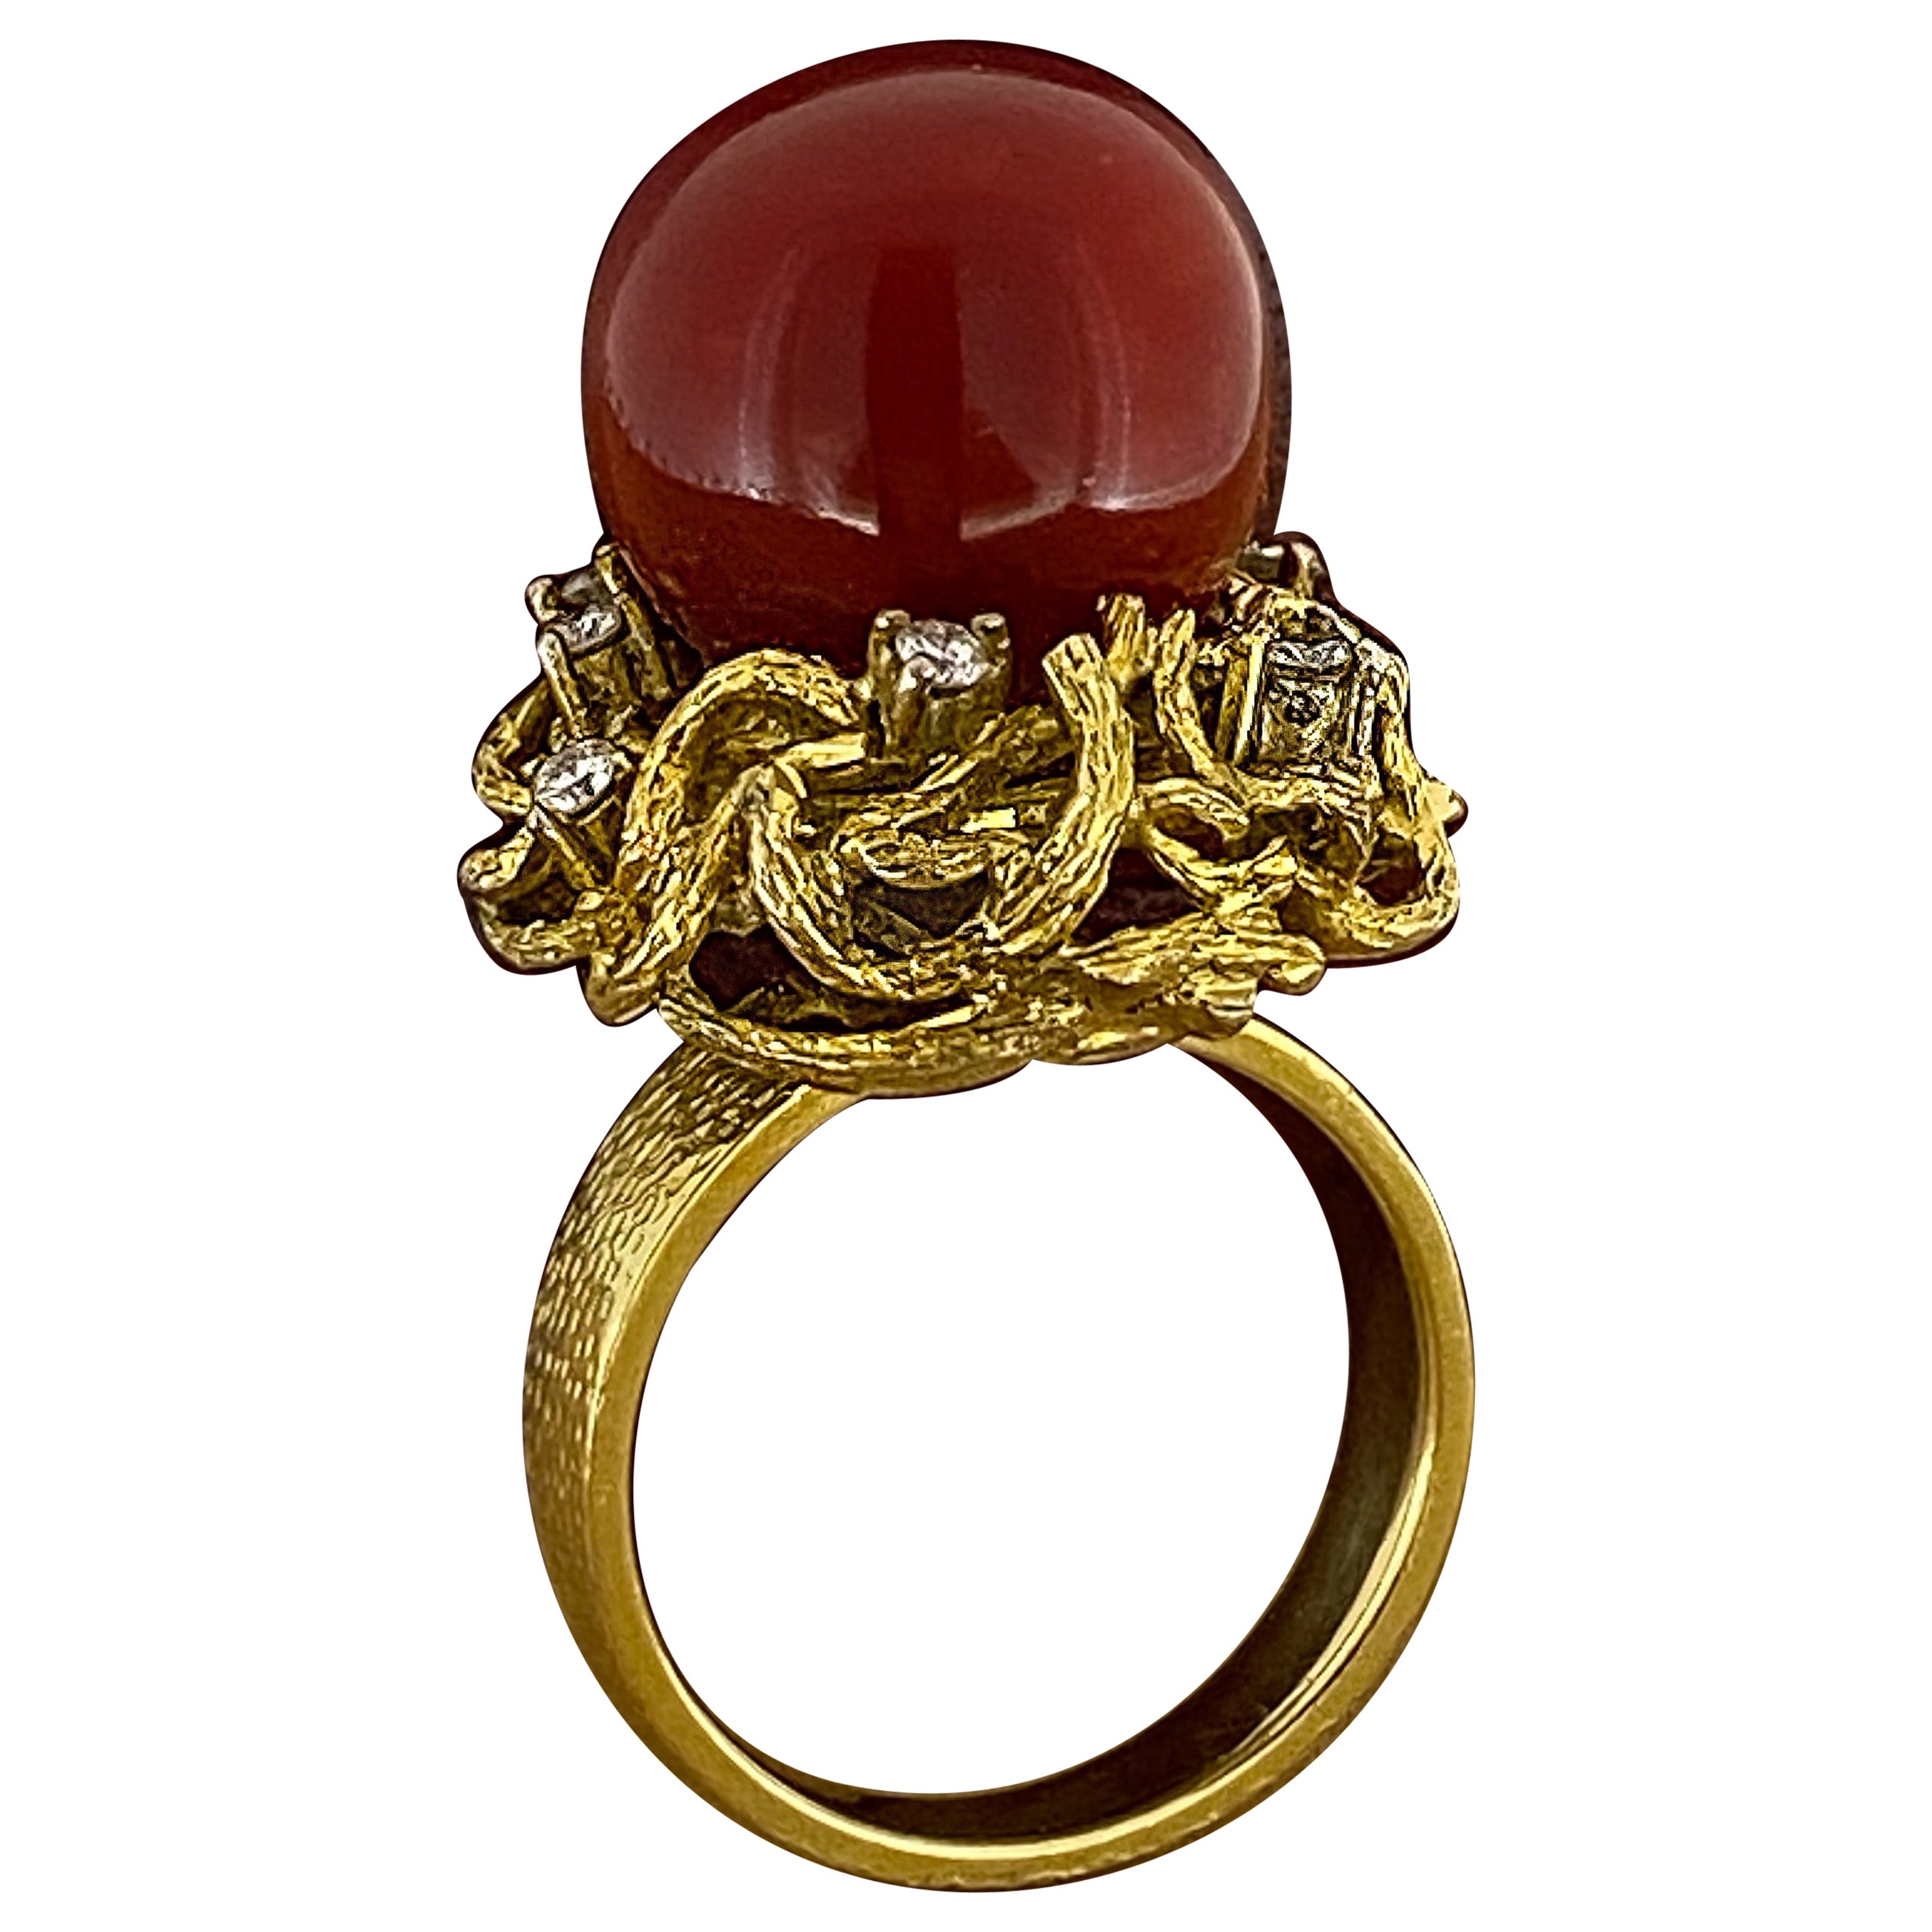 20ct (14mm) Natural Mediterranean OxBlood Red Coral & Diamond Ring in 14K Gold.